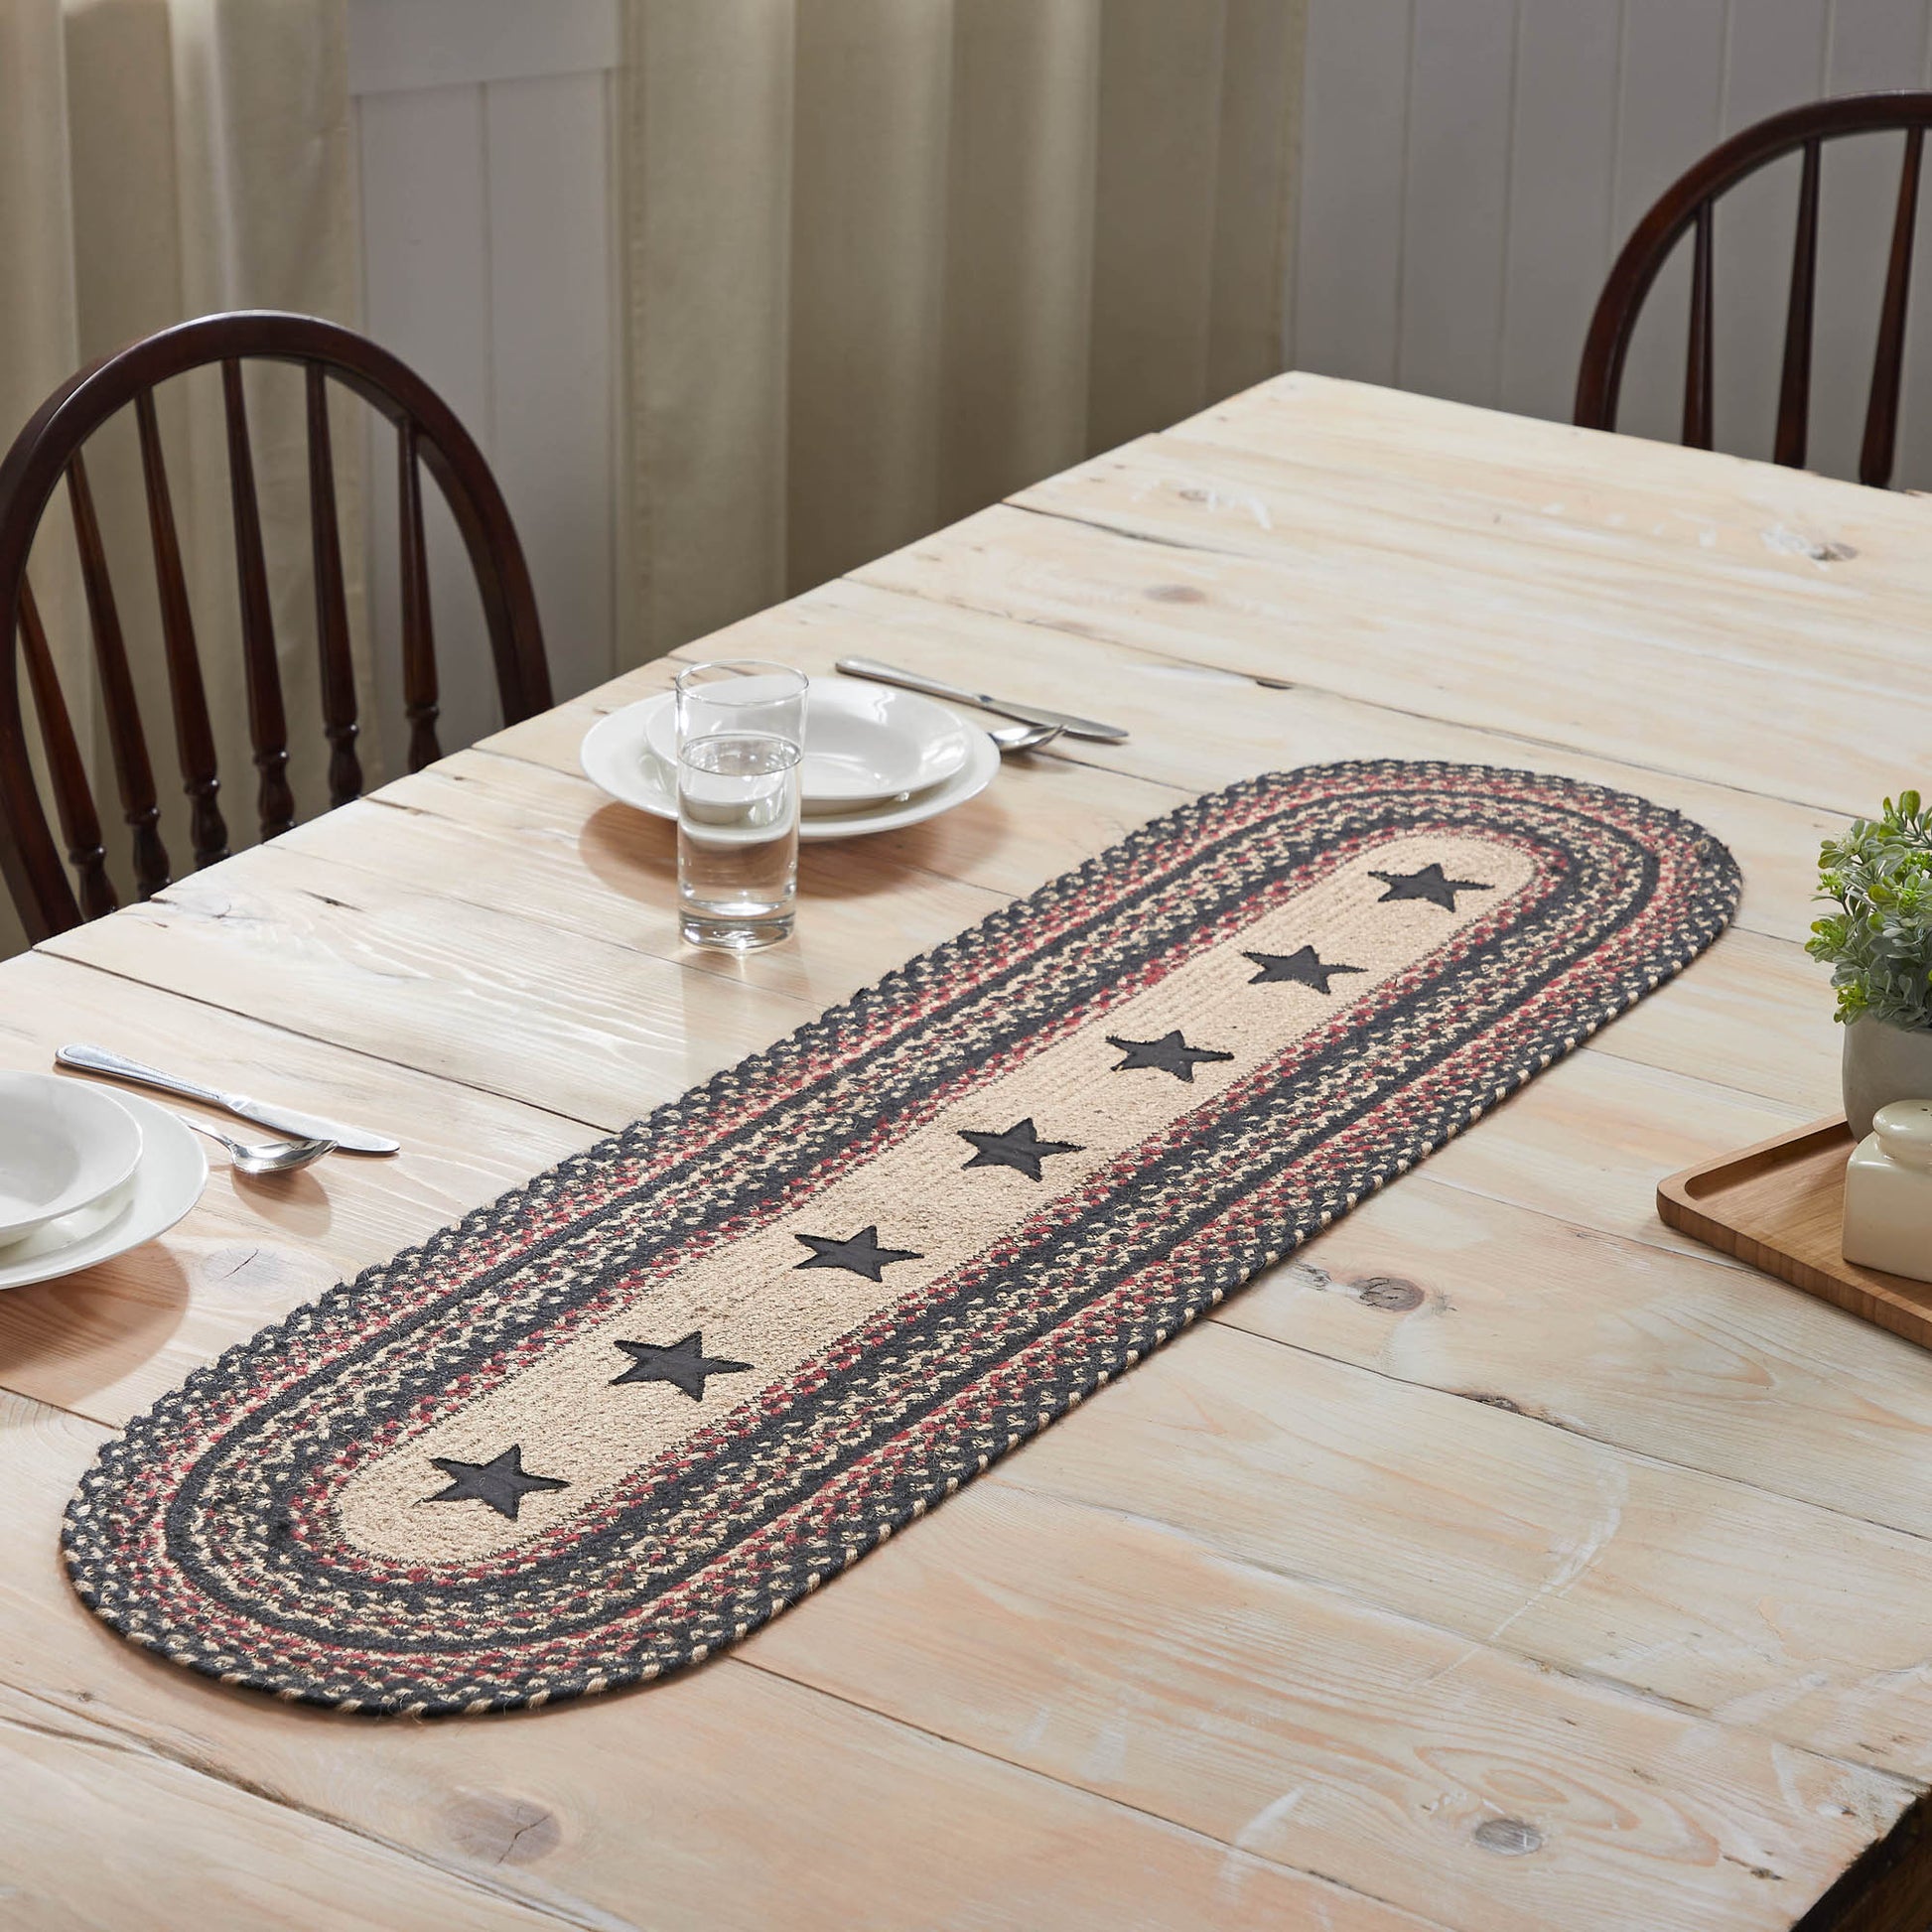 81330-Colonial-Star-Jute-Oval-Runner-13x48-image-5